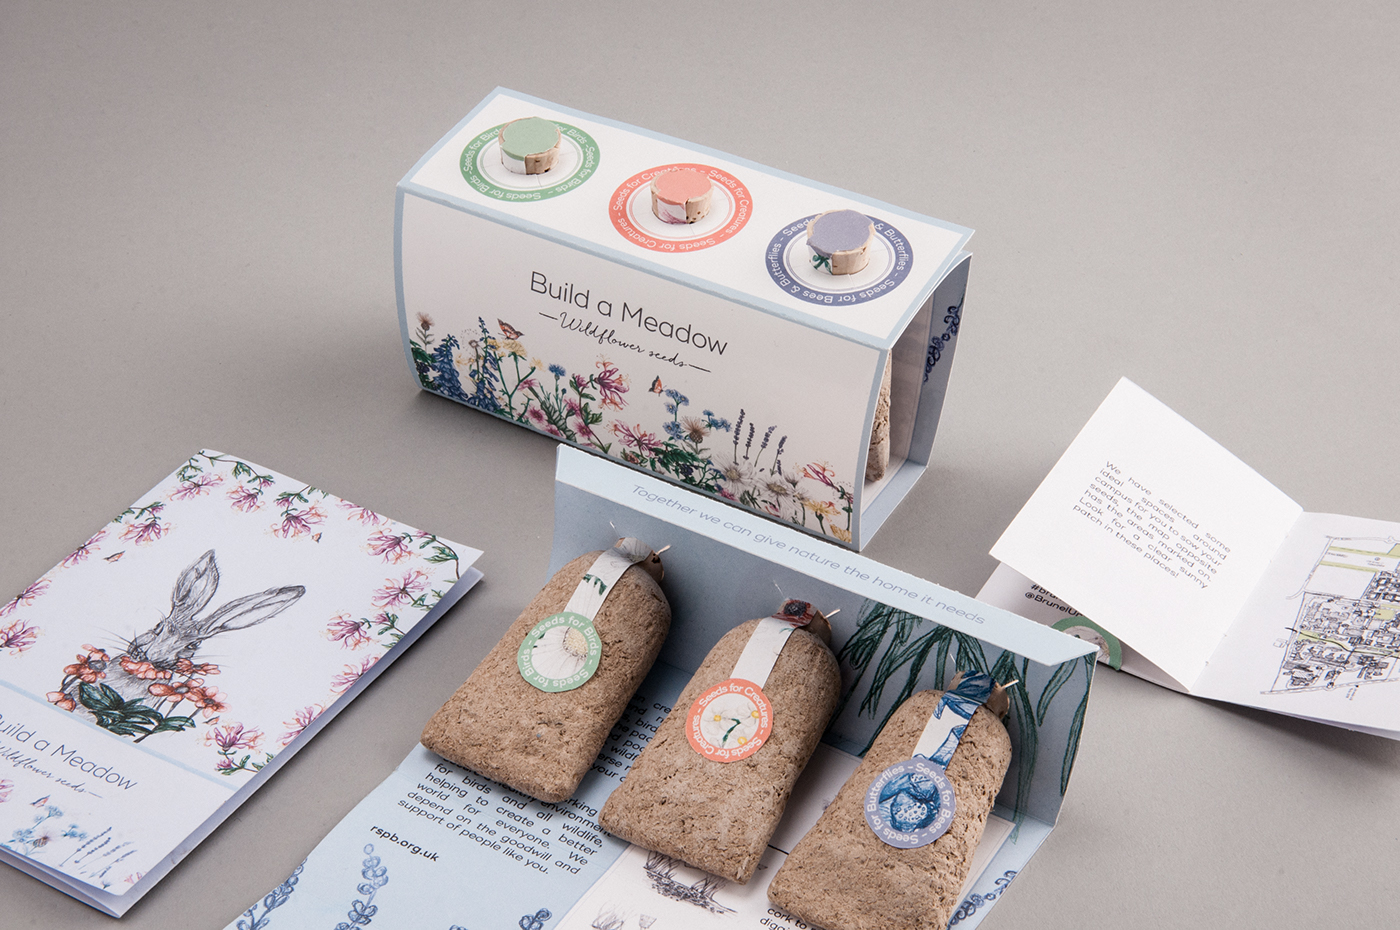 wild life Nature Packaging seeds illustrations Flowers wild flower rspb eco design Sustainability